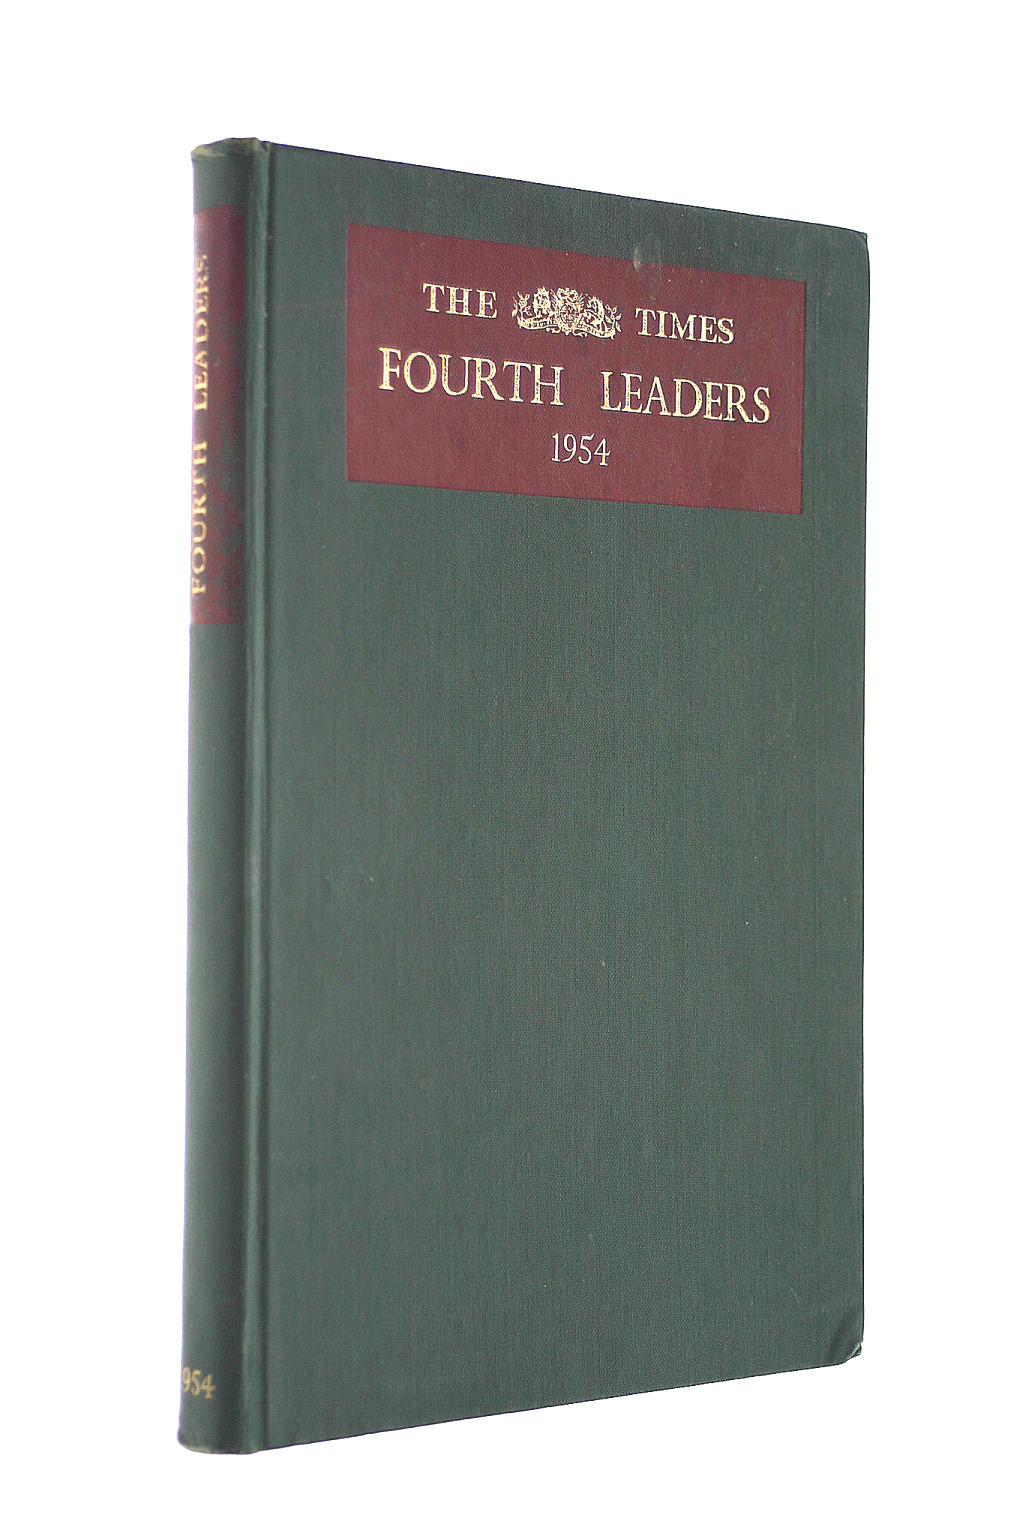 ANON - Fourth Leaders from the Times 1954